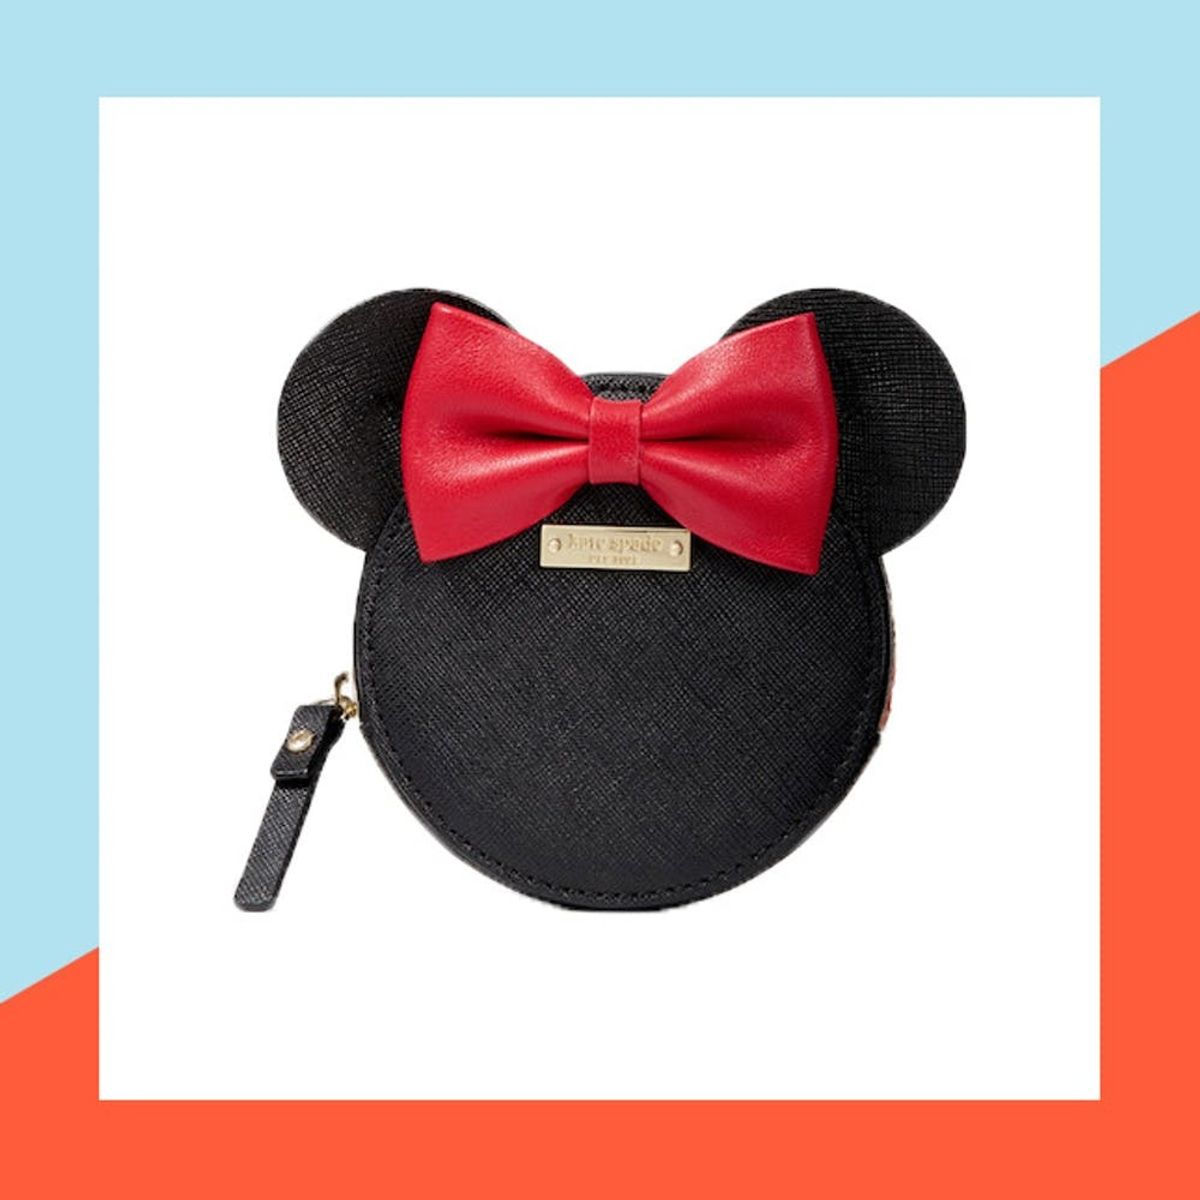 Kate Spade Expanded Its Minnie Mouse Collection With Lots of Pretty New Things